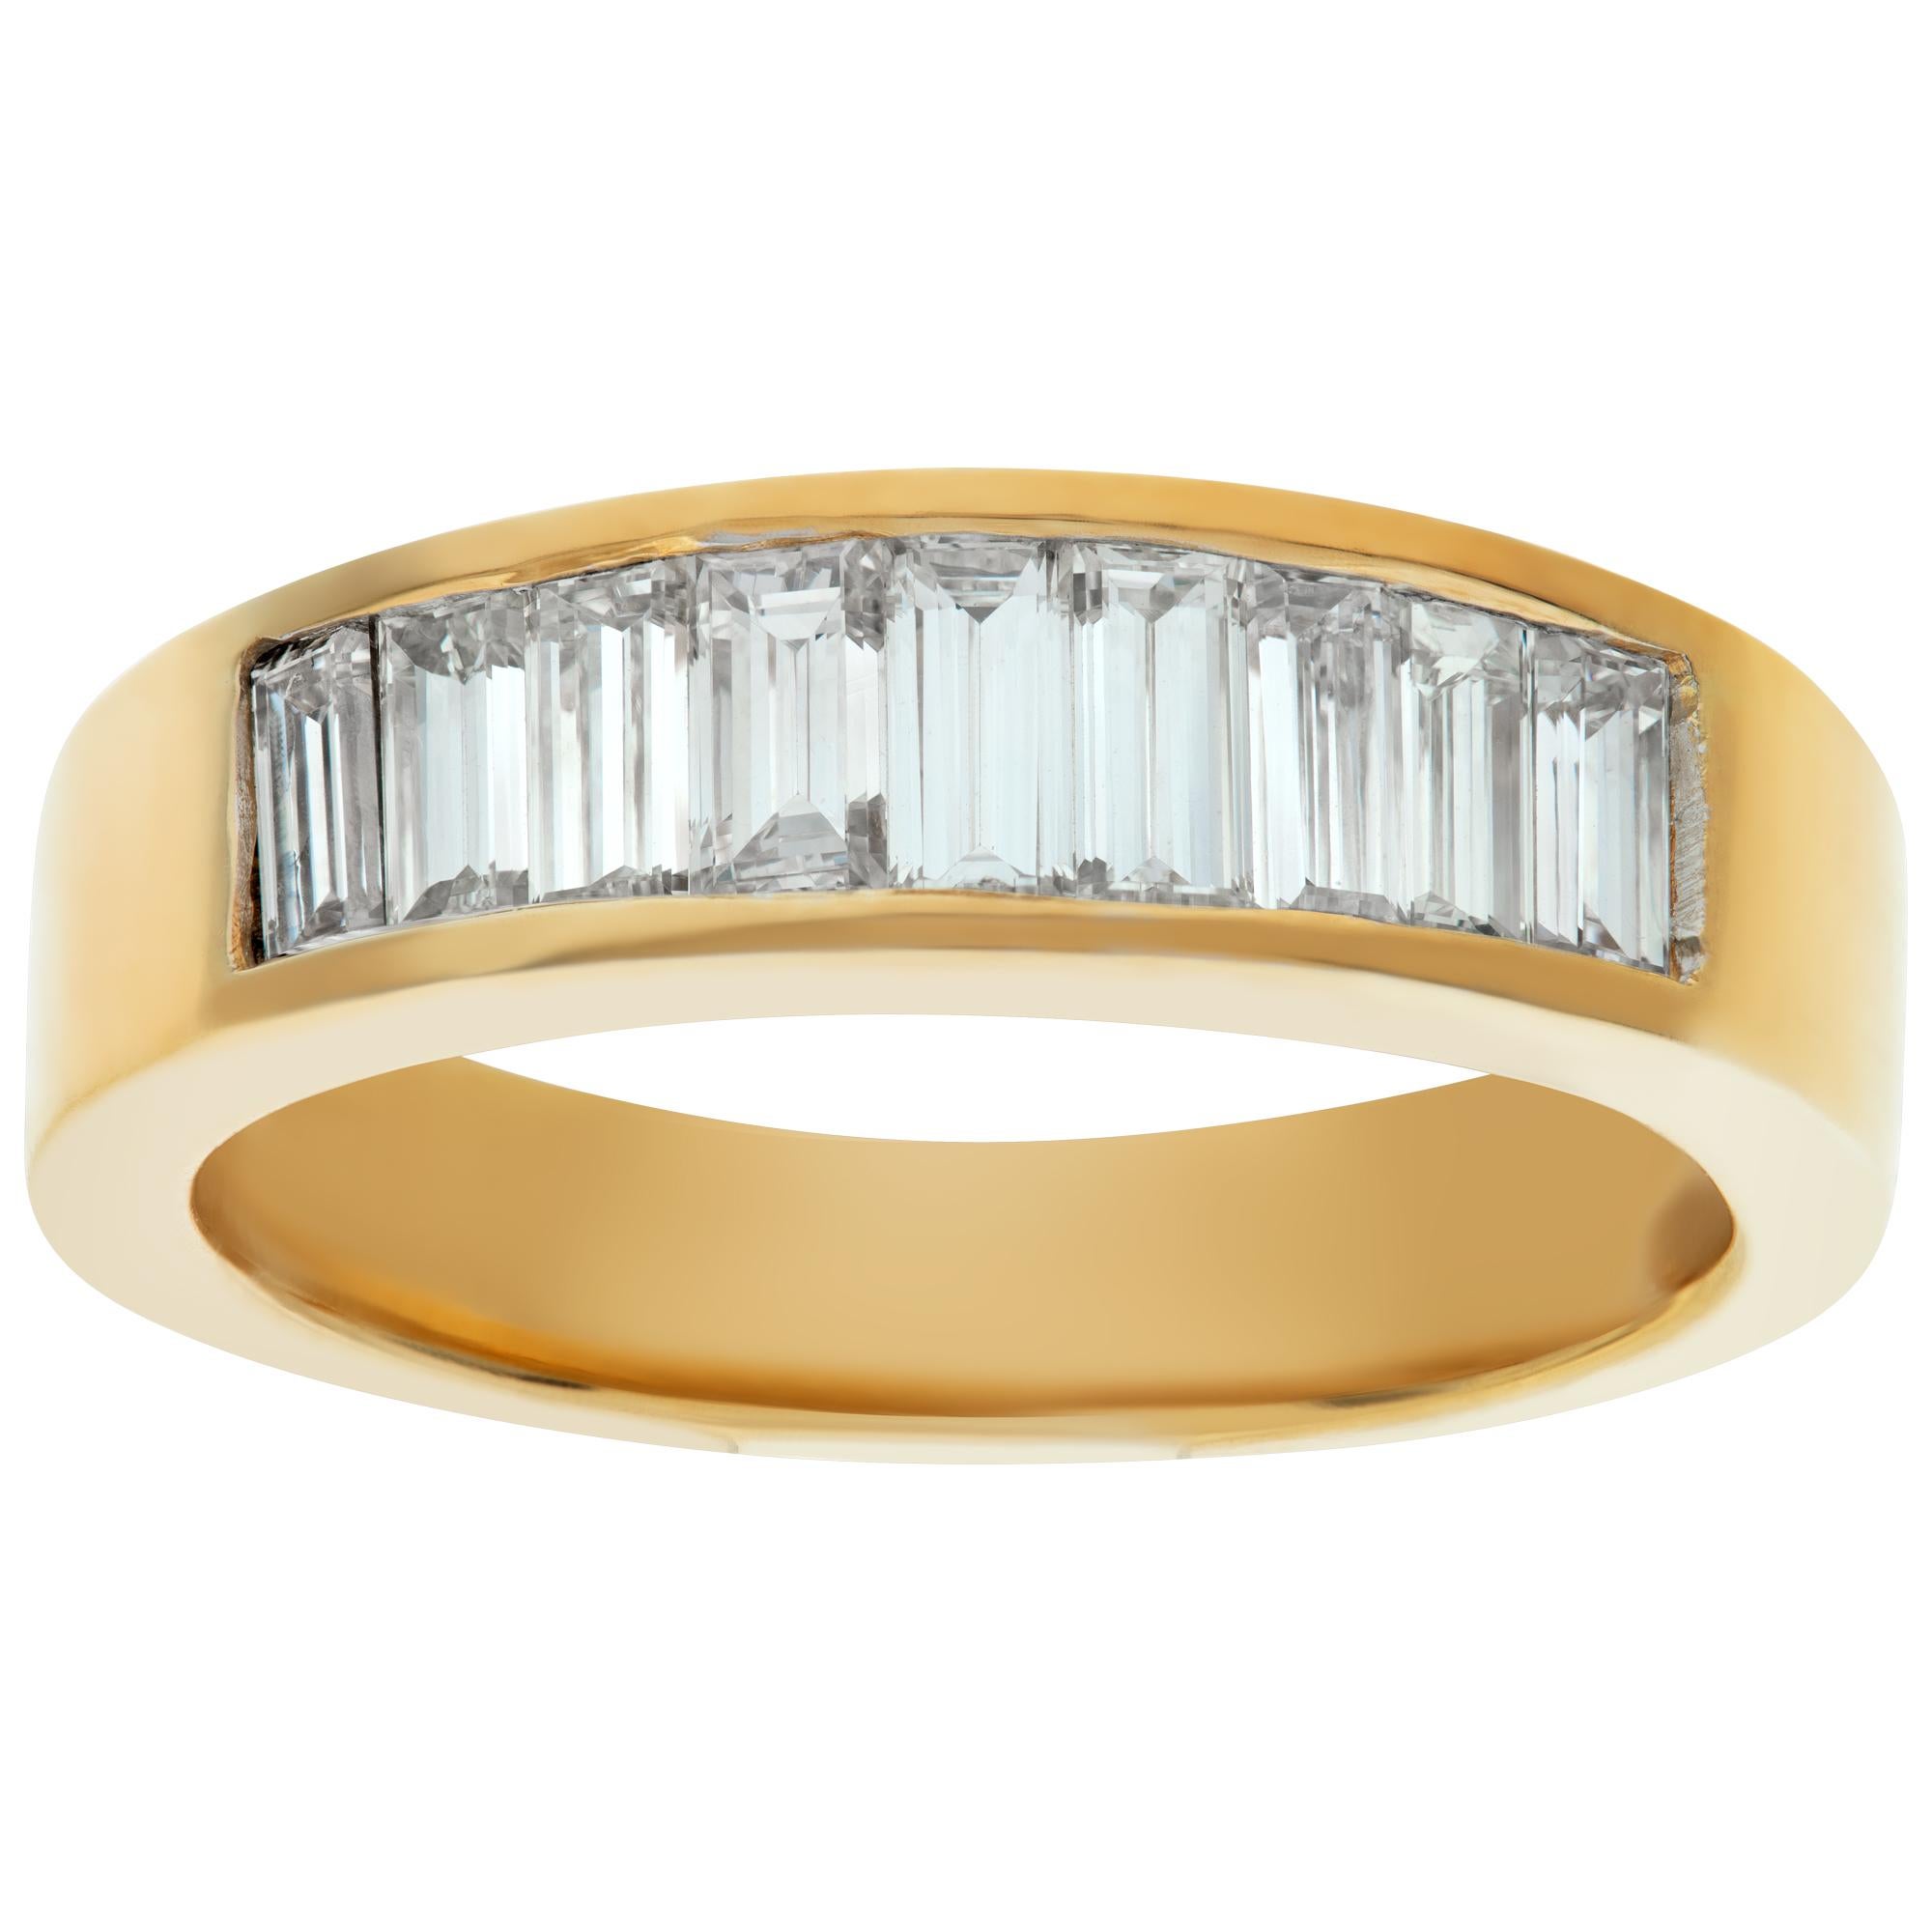 Yellow Gold Diamond Wedding Band With Approximately 1.4 Carats in diamonds For Sale